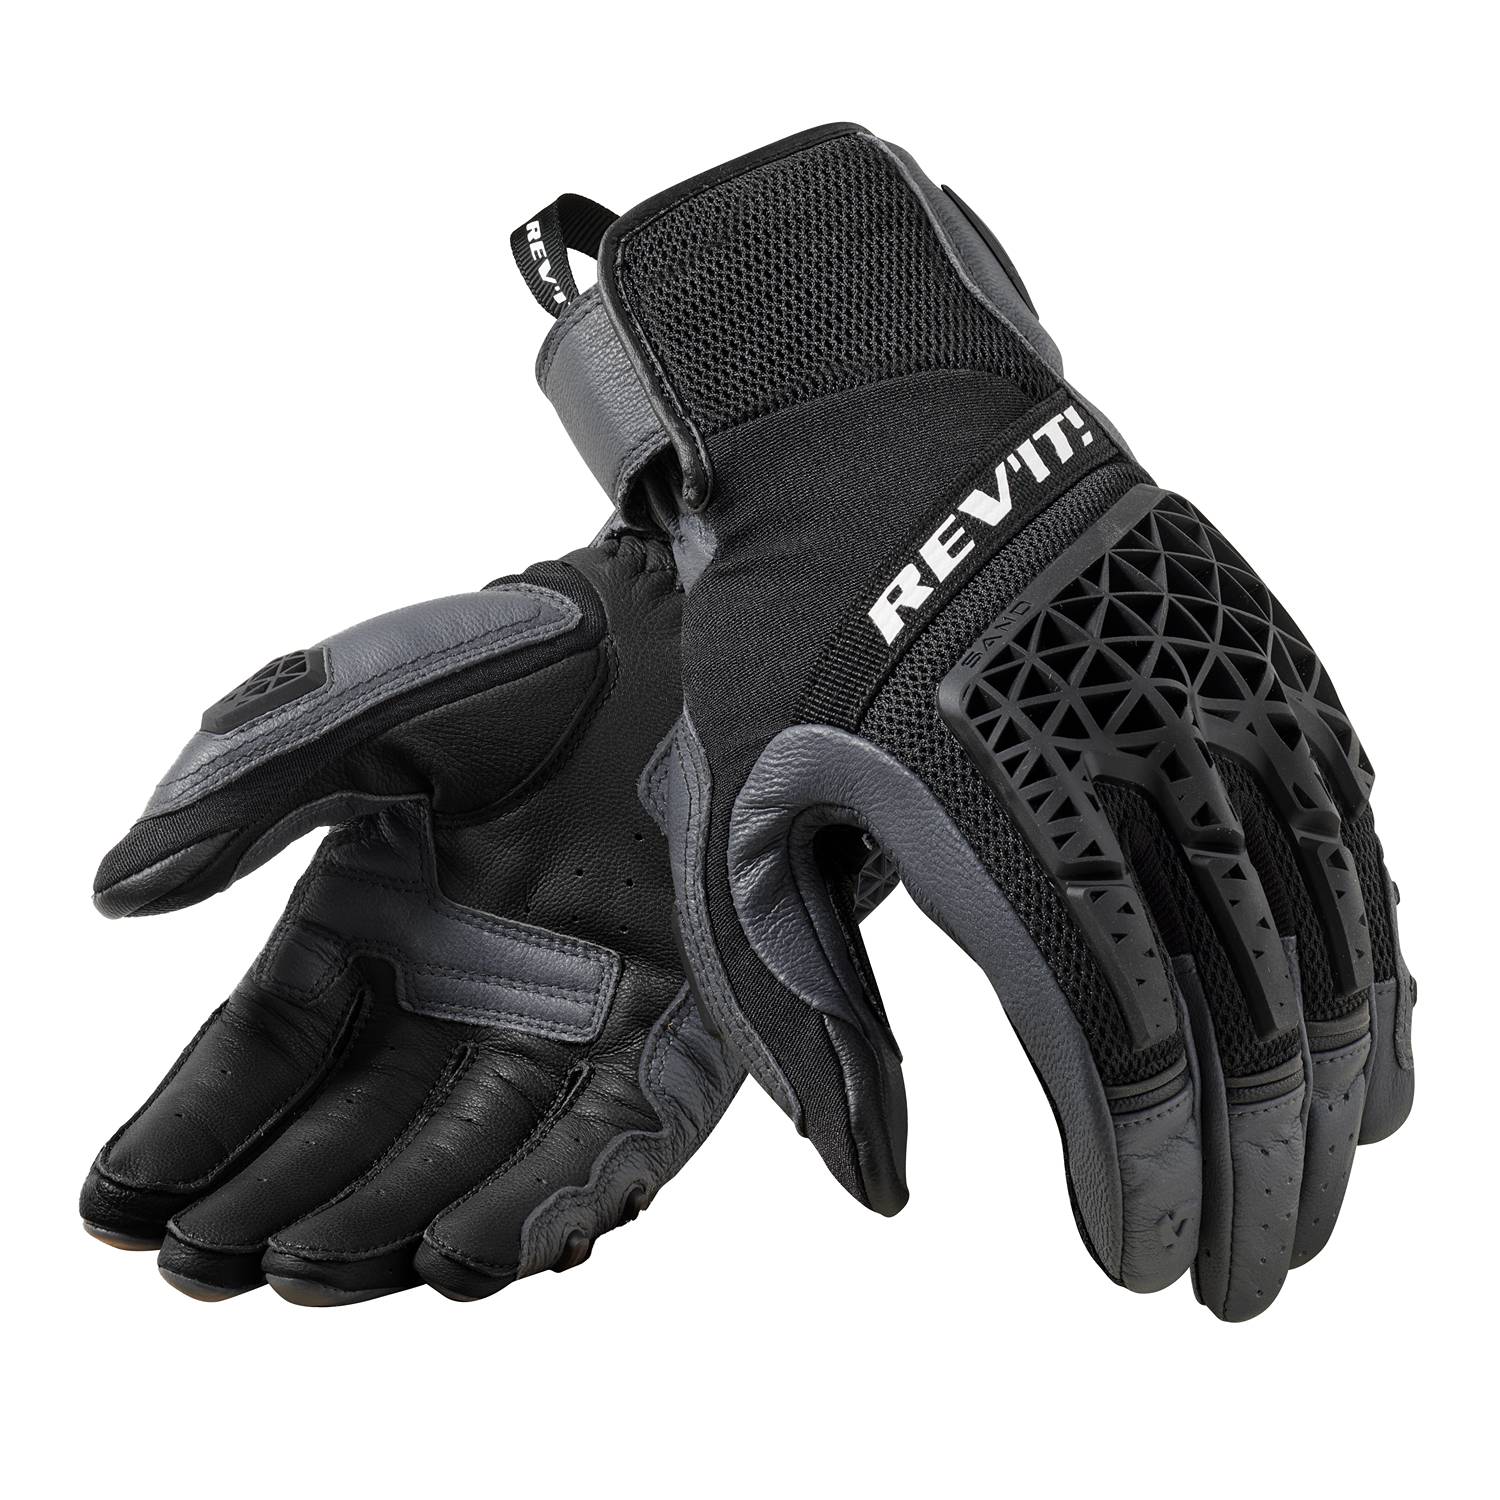 Image of REV'IT! Sand 4 Gloves Gray Black Size 2XL ID 8700001375054